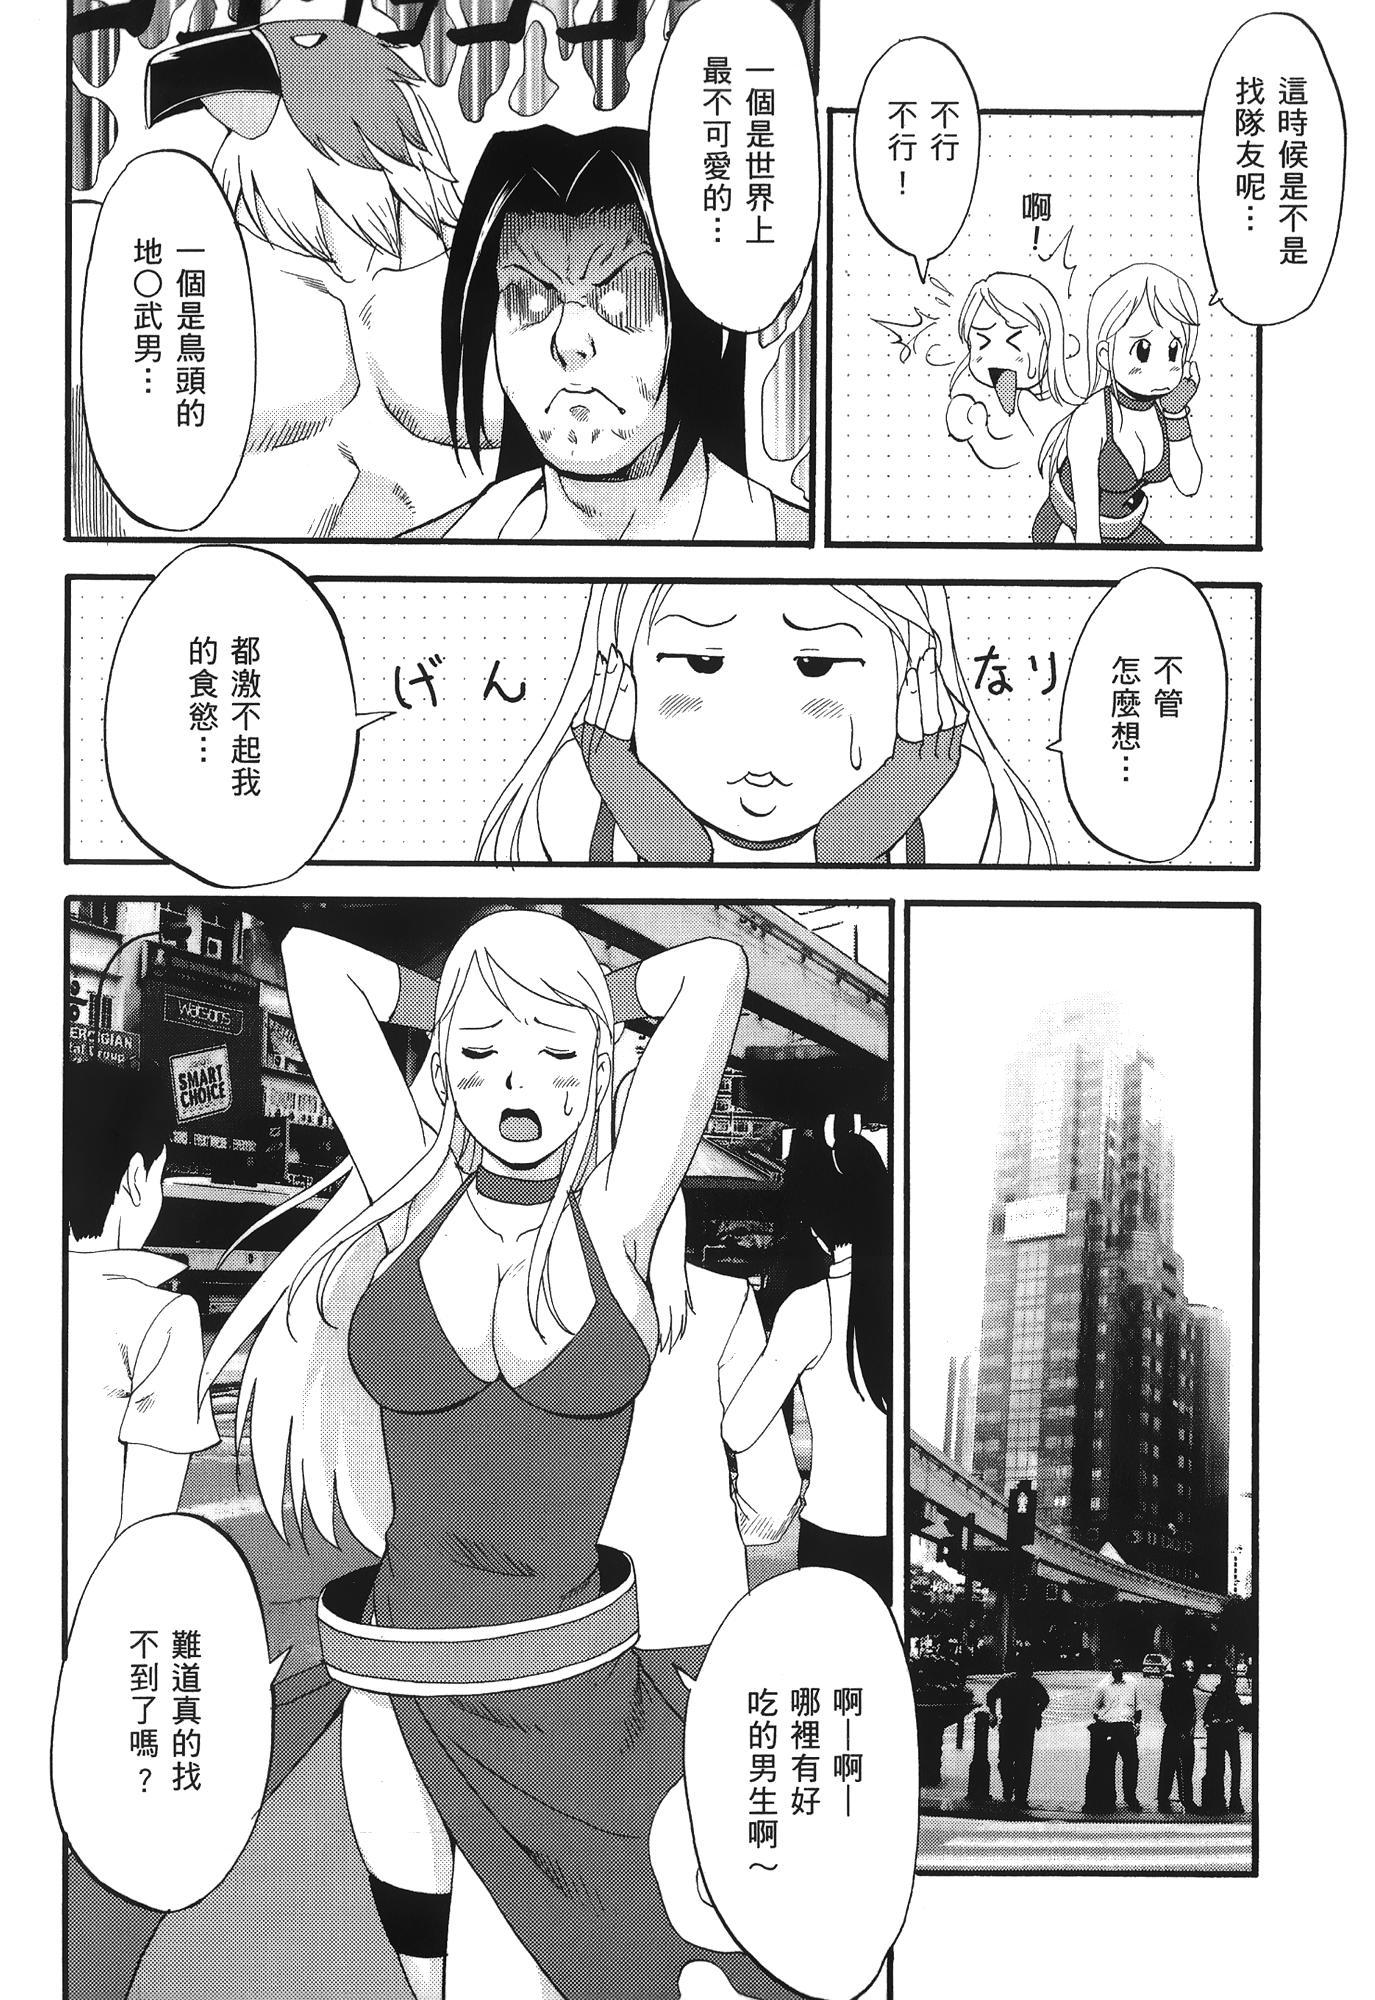 Porn [Saigado] THE YURI & FRIENDS 6 (King of Fighters) | 武鬥美少女 [Chinese] - King of fighters Hindi - Page 3